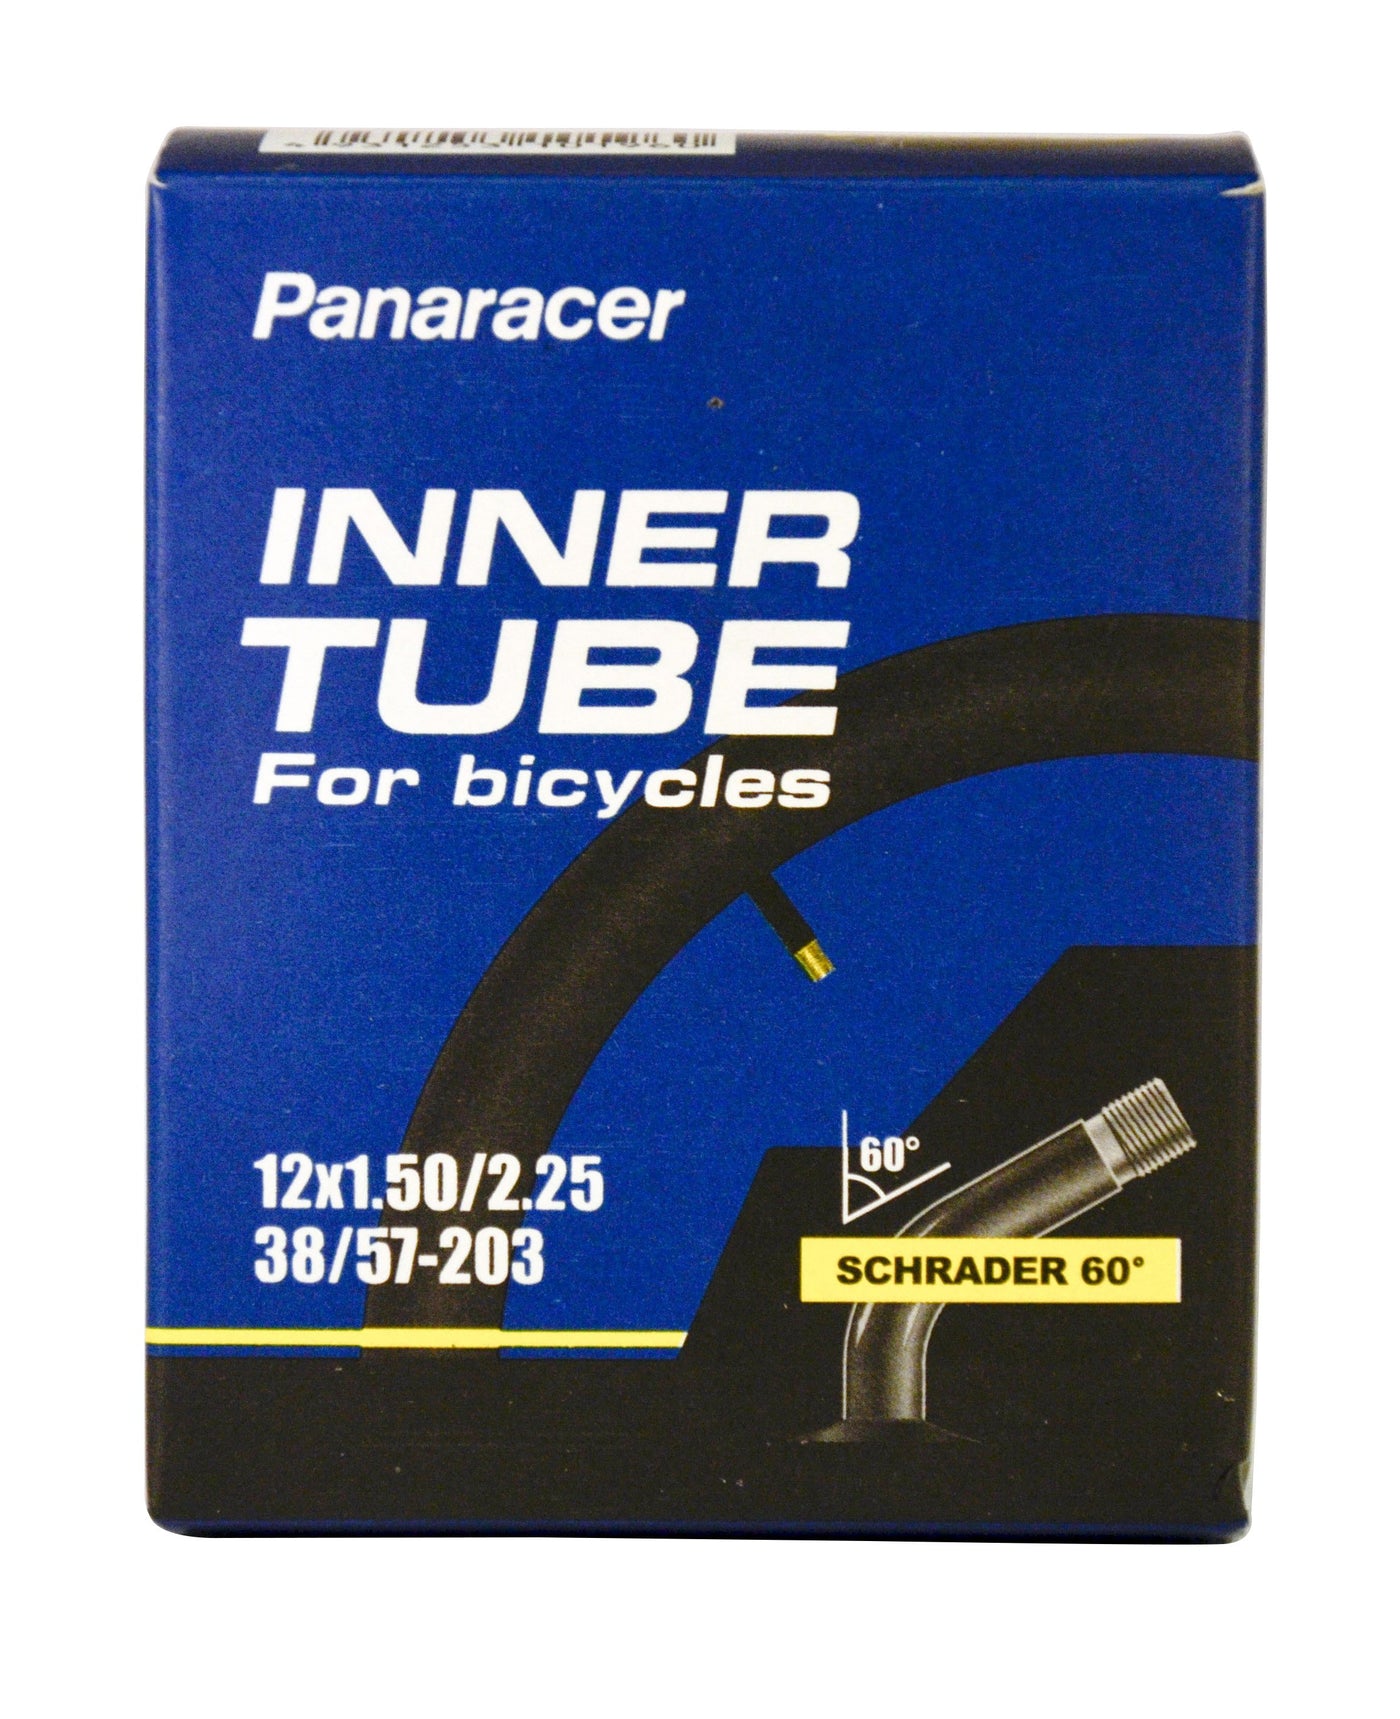 Standard Angled Bicycle Tube | Schrader (American) valve